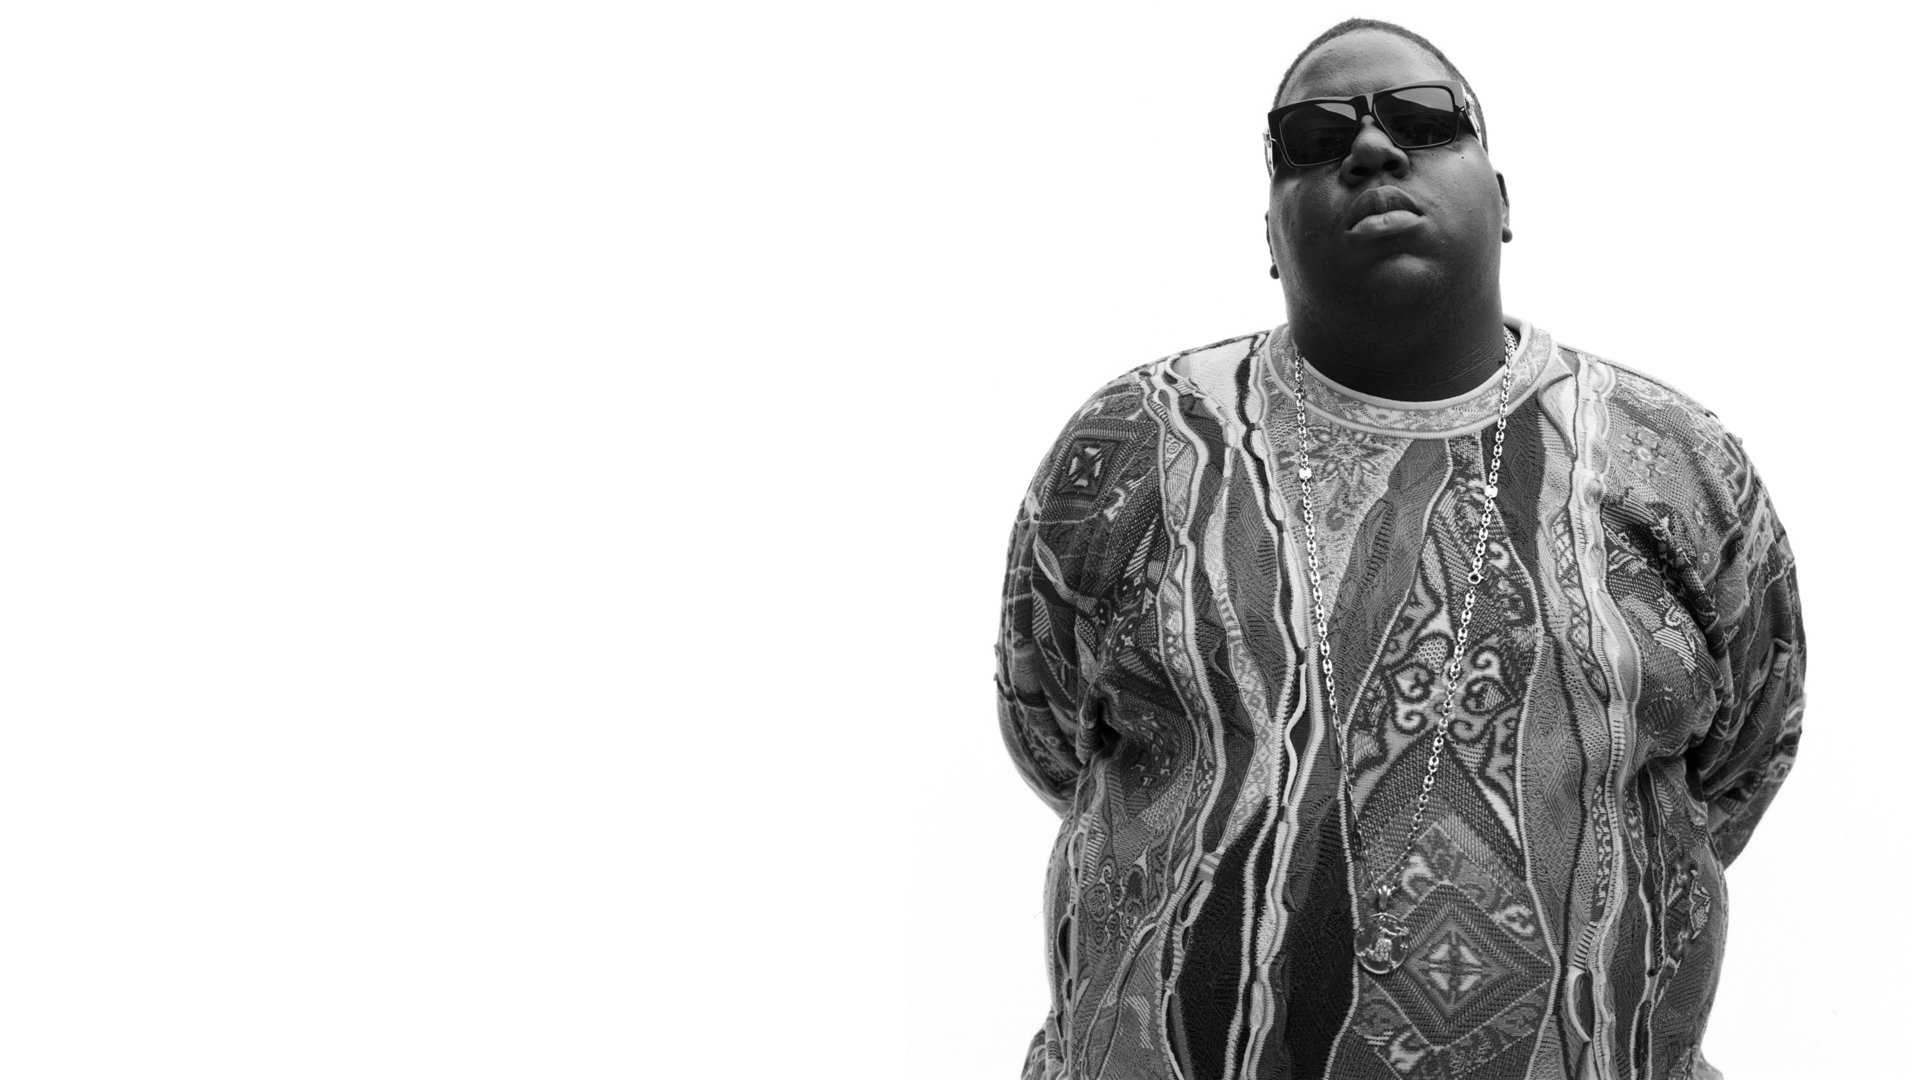 Music The Notorious B.I.G. HD Wallpaper | Background Image